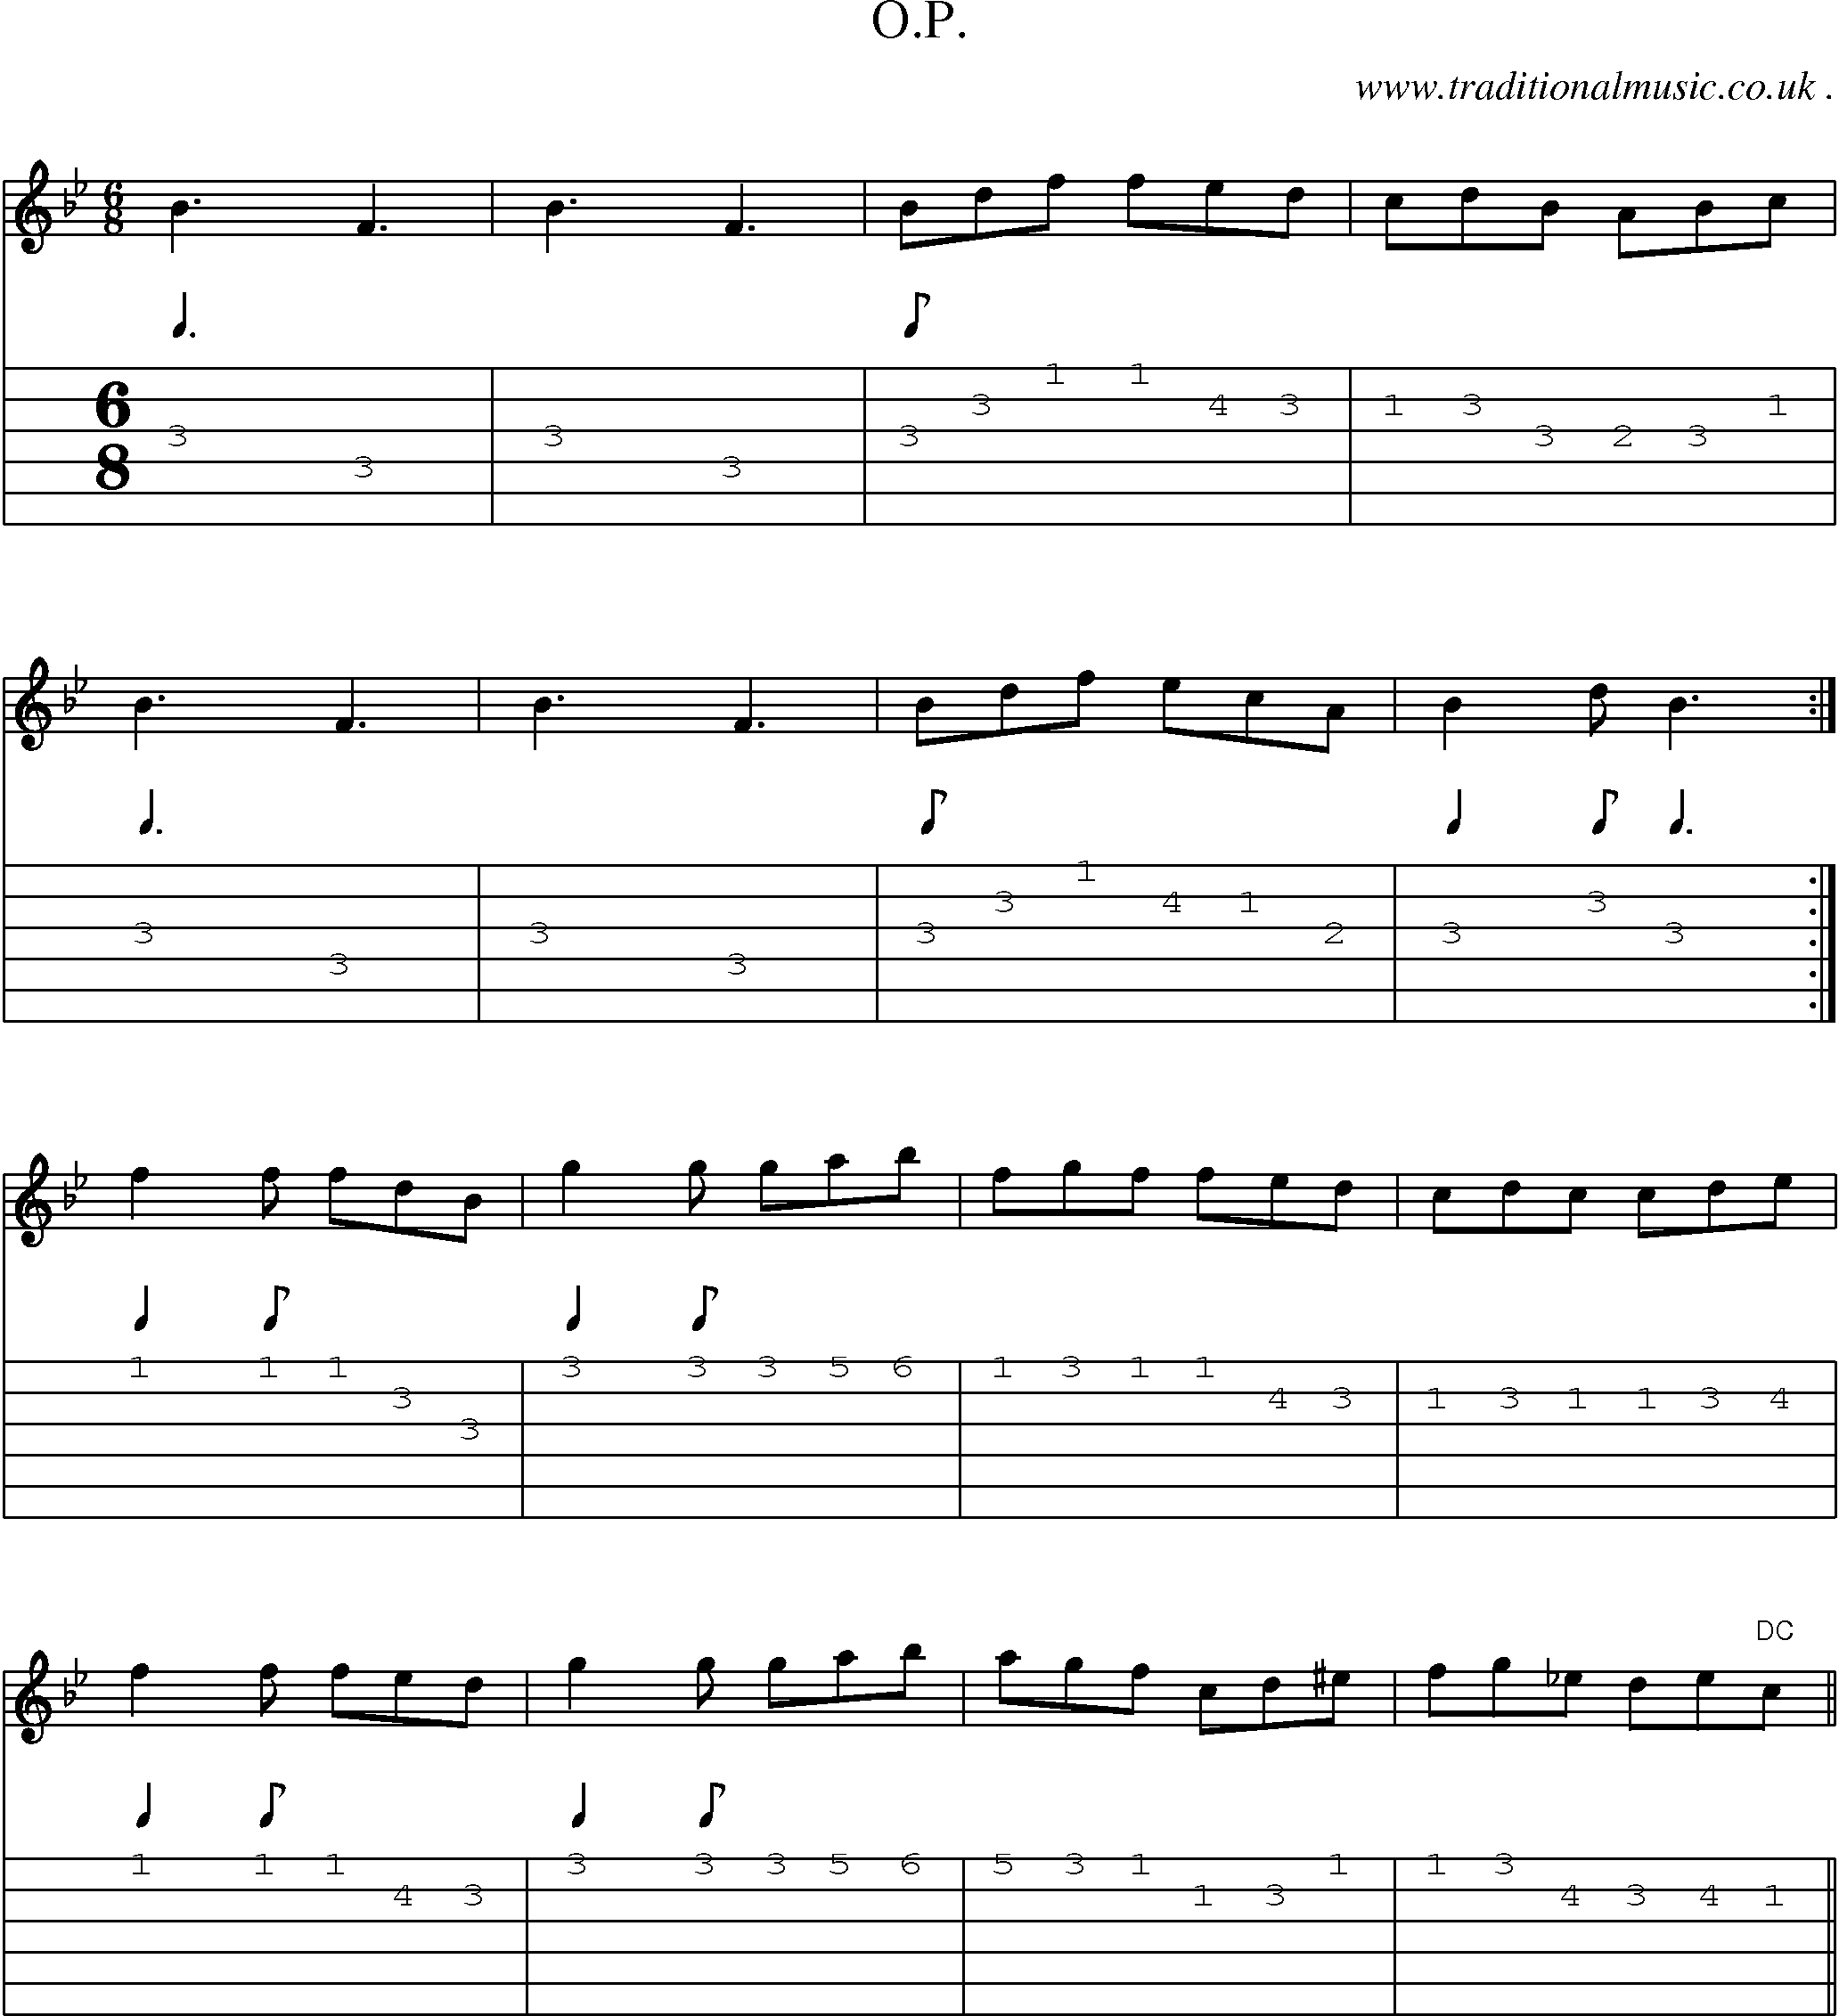 Sheet-Music and Guitar Tabs for Op